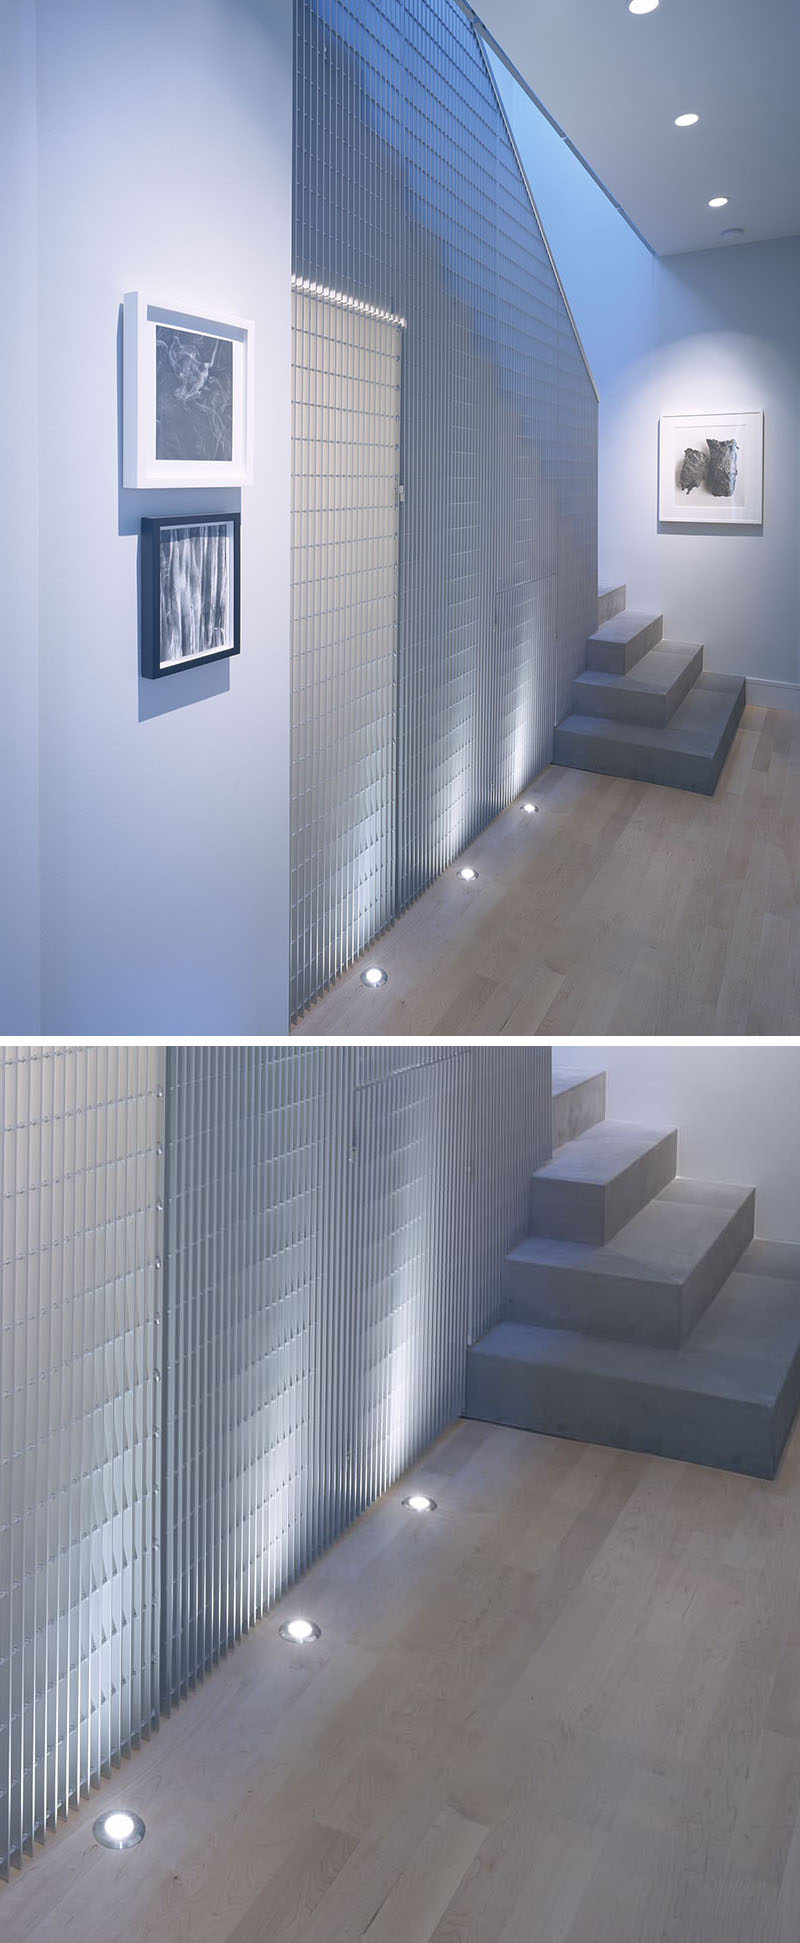 7 Interiors That Use Dramatic Uplighting To Brighten A Space // The lights beneath the grid-like wall in this home cast a cool light and make the texture on the wall more dramatic.